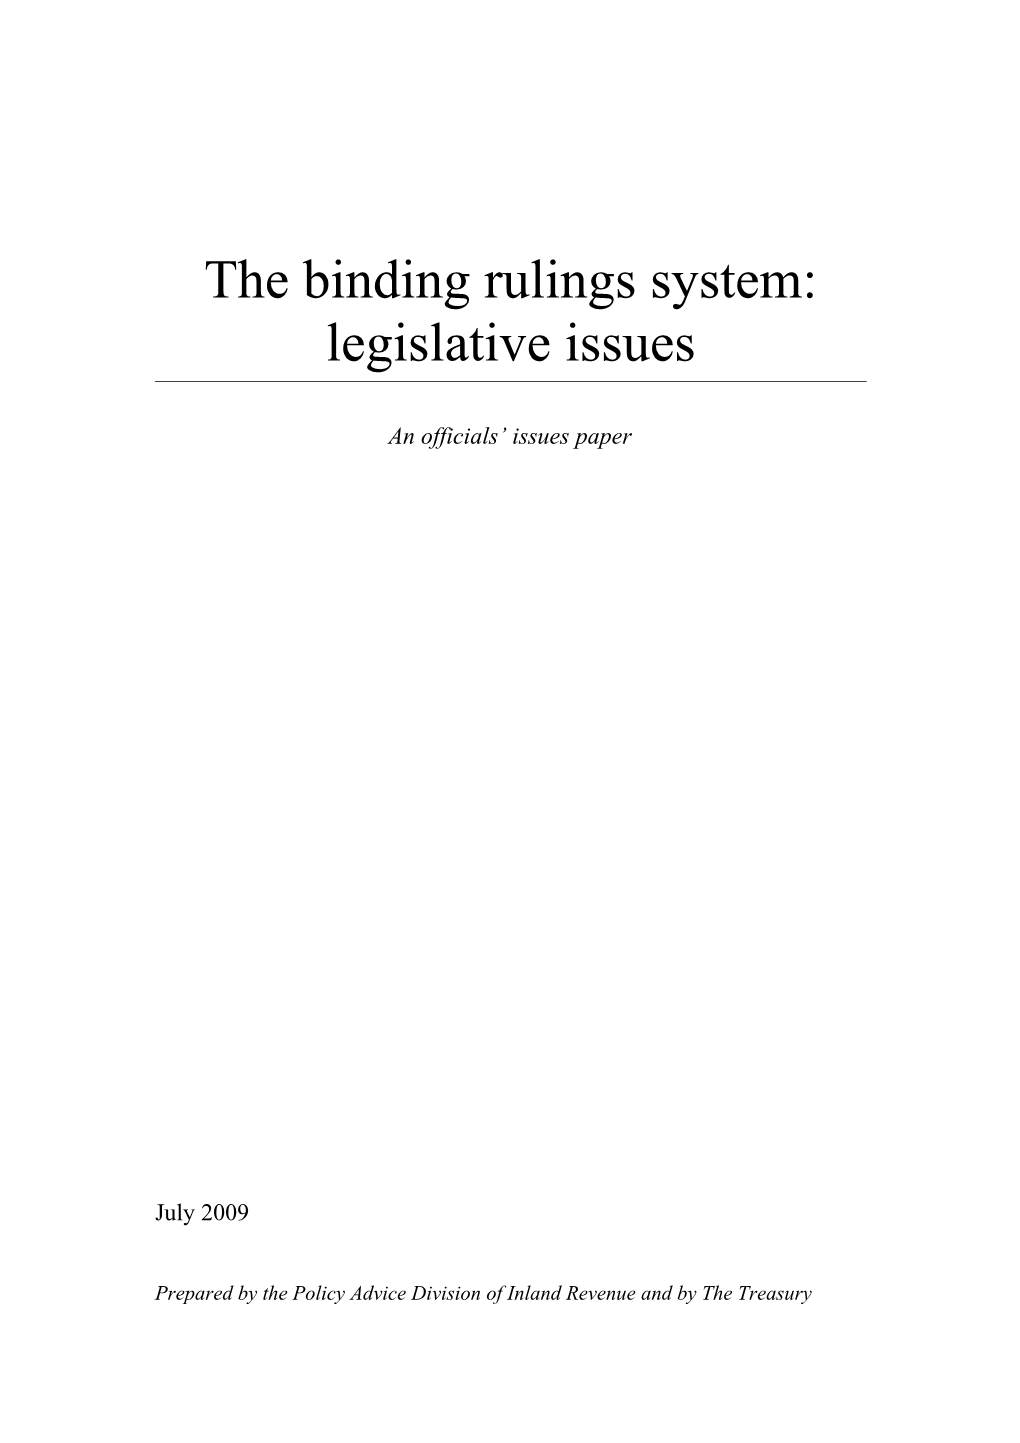 Issues Paper - the Binding Rulings System: Legislative Issues